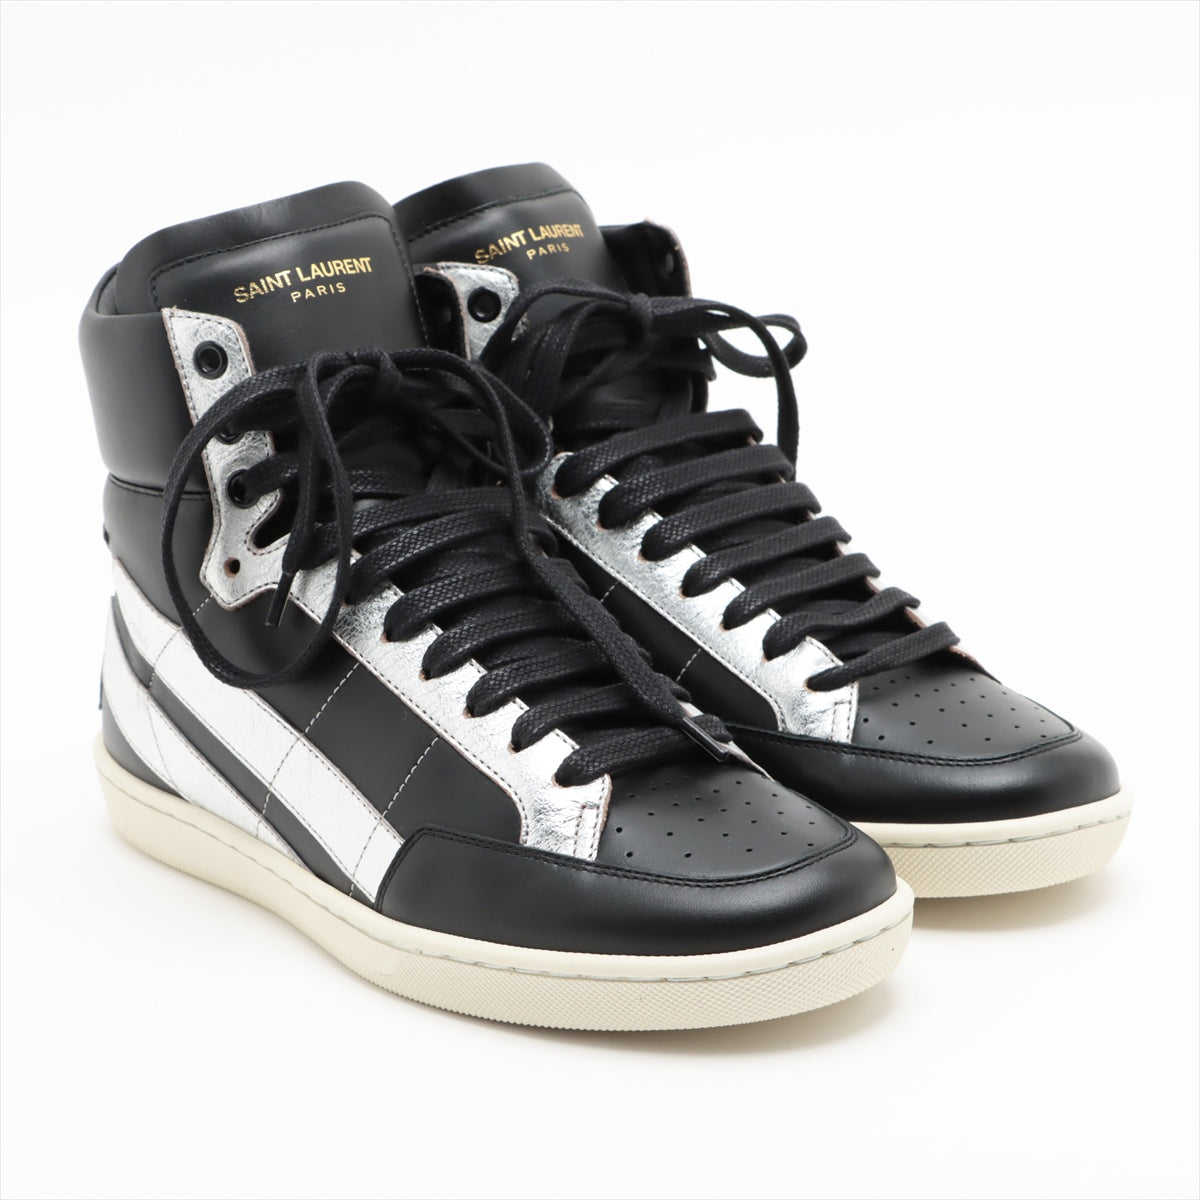 Saint Laurent Paris Leather High-top Sneakers 39 Men's Black 418044 Is there a replacement string